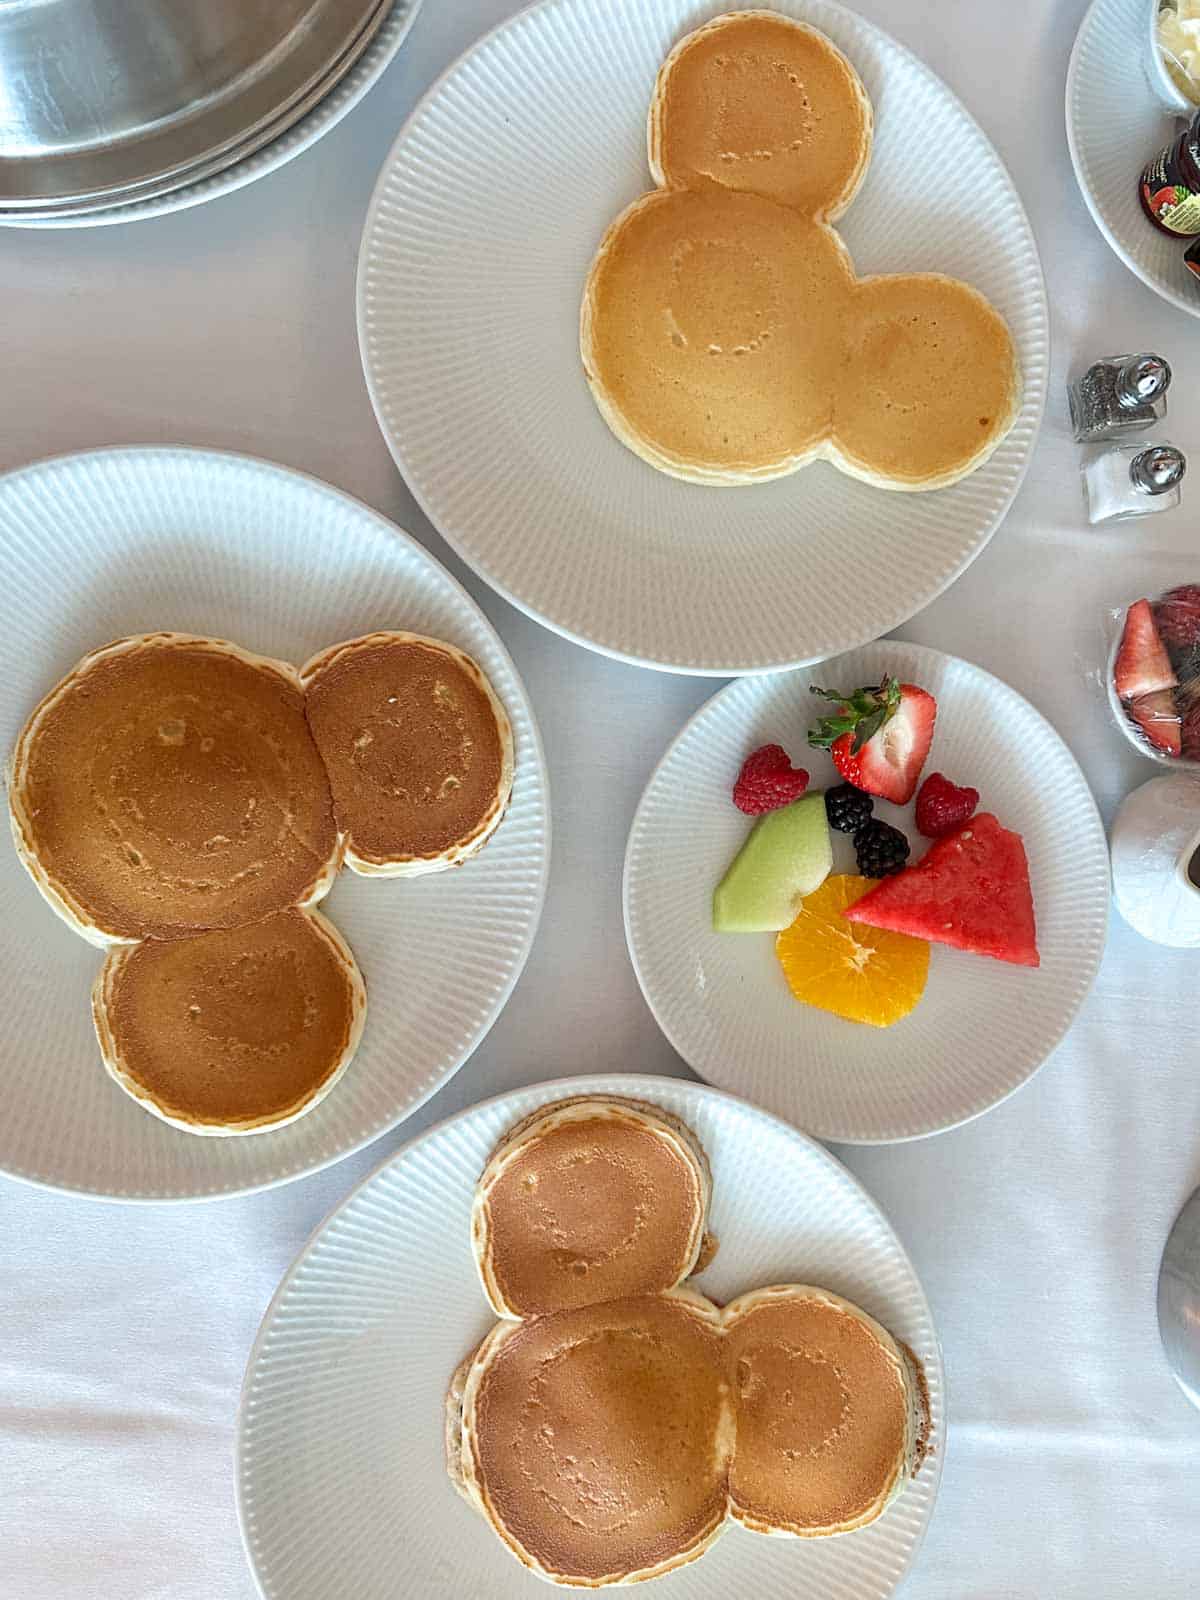 Top view of three white plates with mickey pancakes on them next to a plate of fruit.